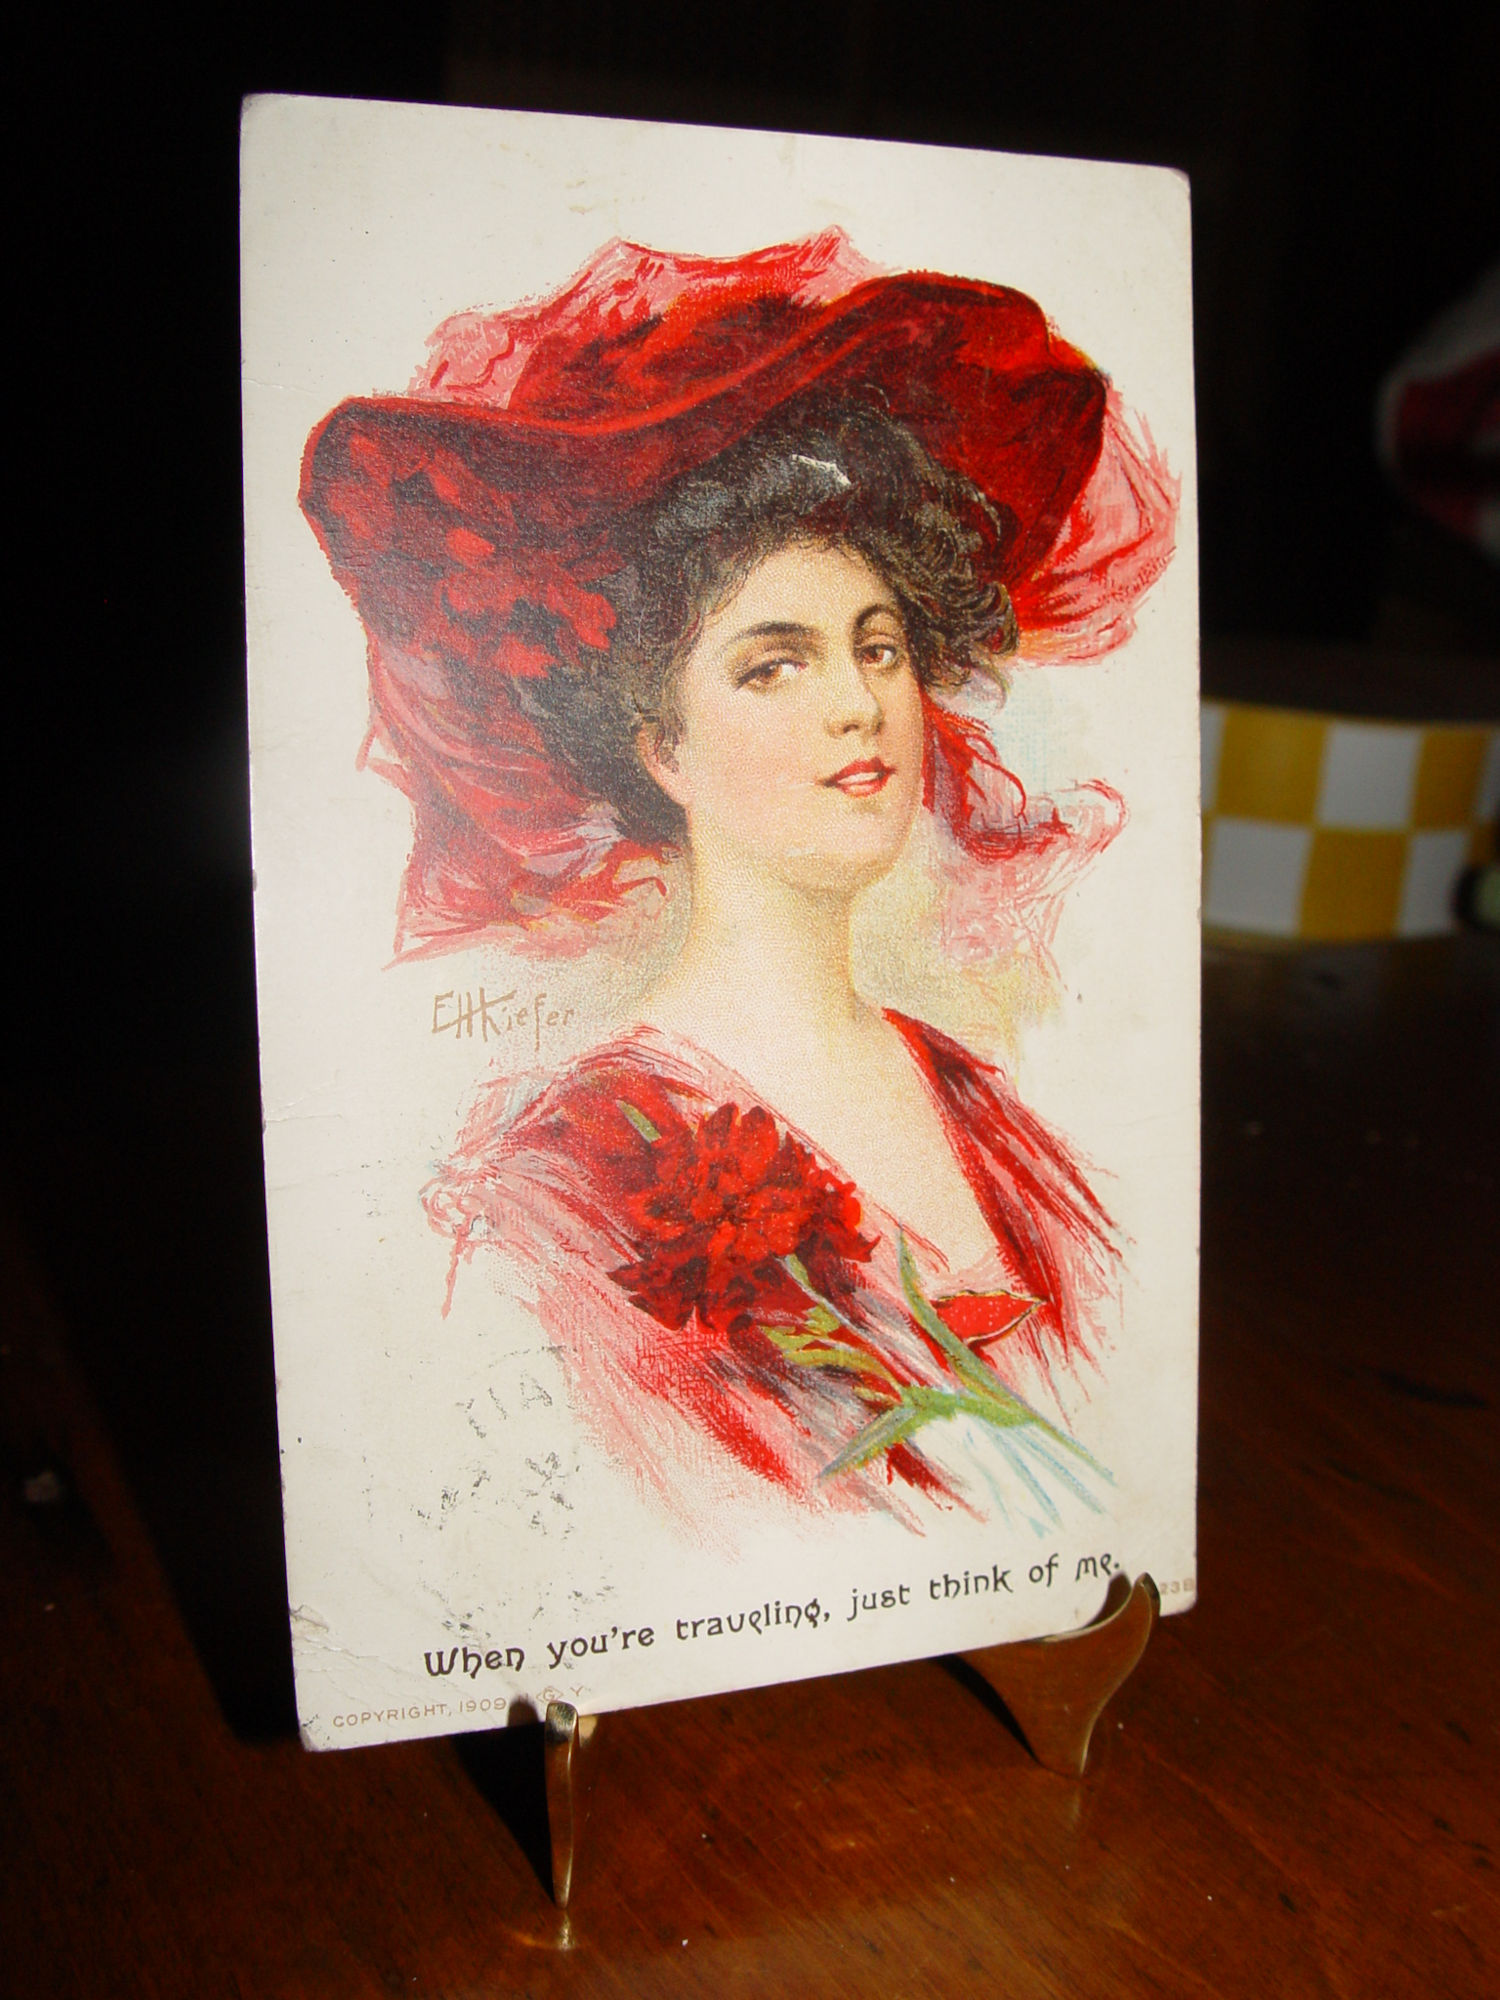 EH Kiefer
                                                "Traveling, think
                                                of me" Raven haired
                                                woman in Red Hat 1908
                                                Postcard